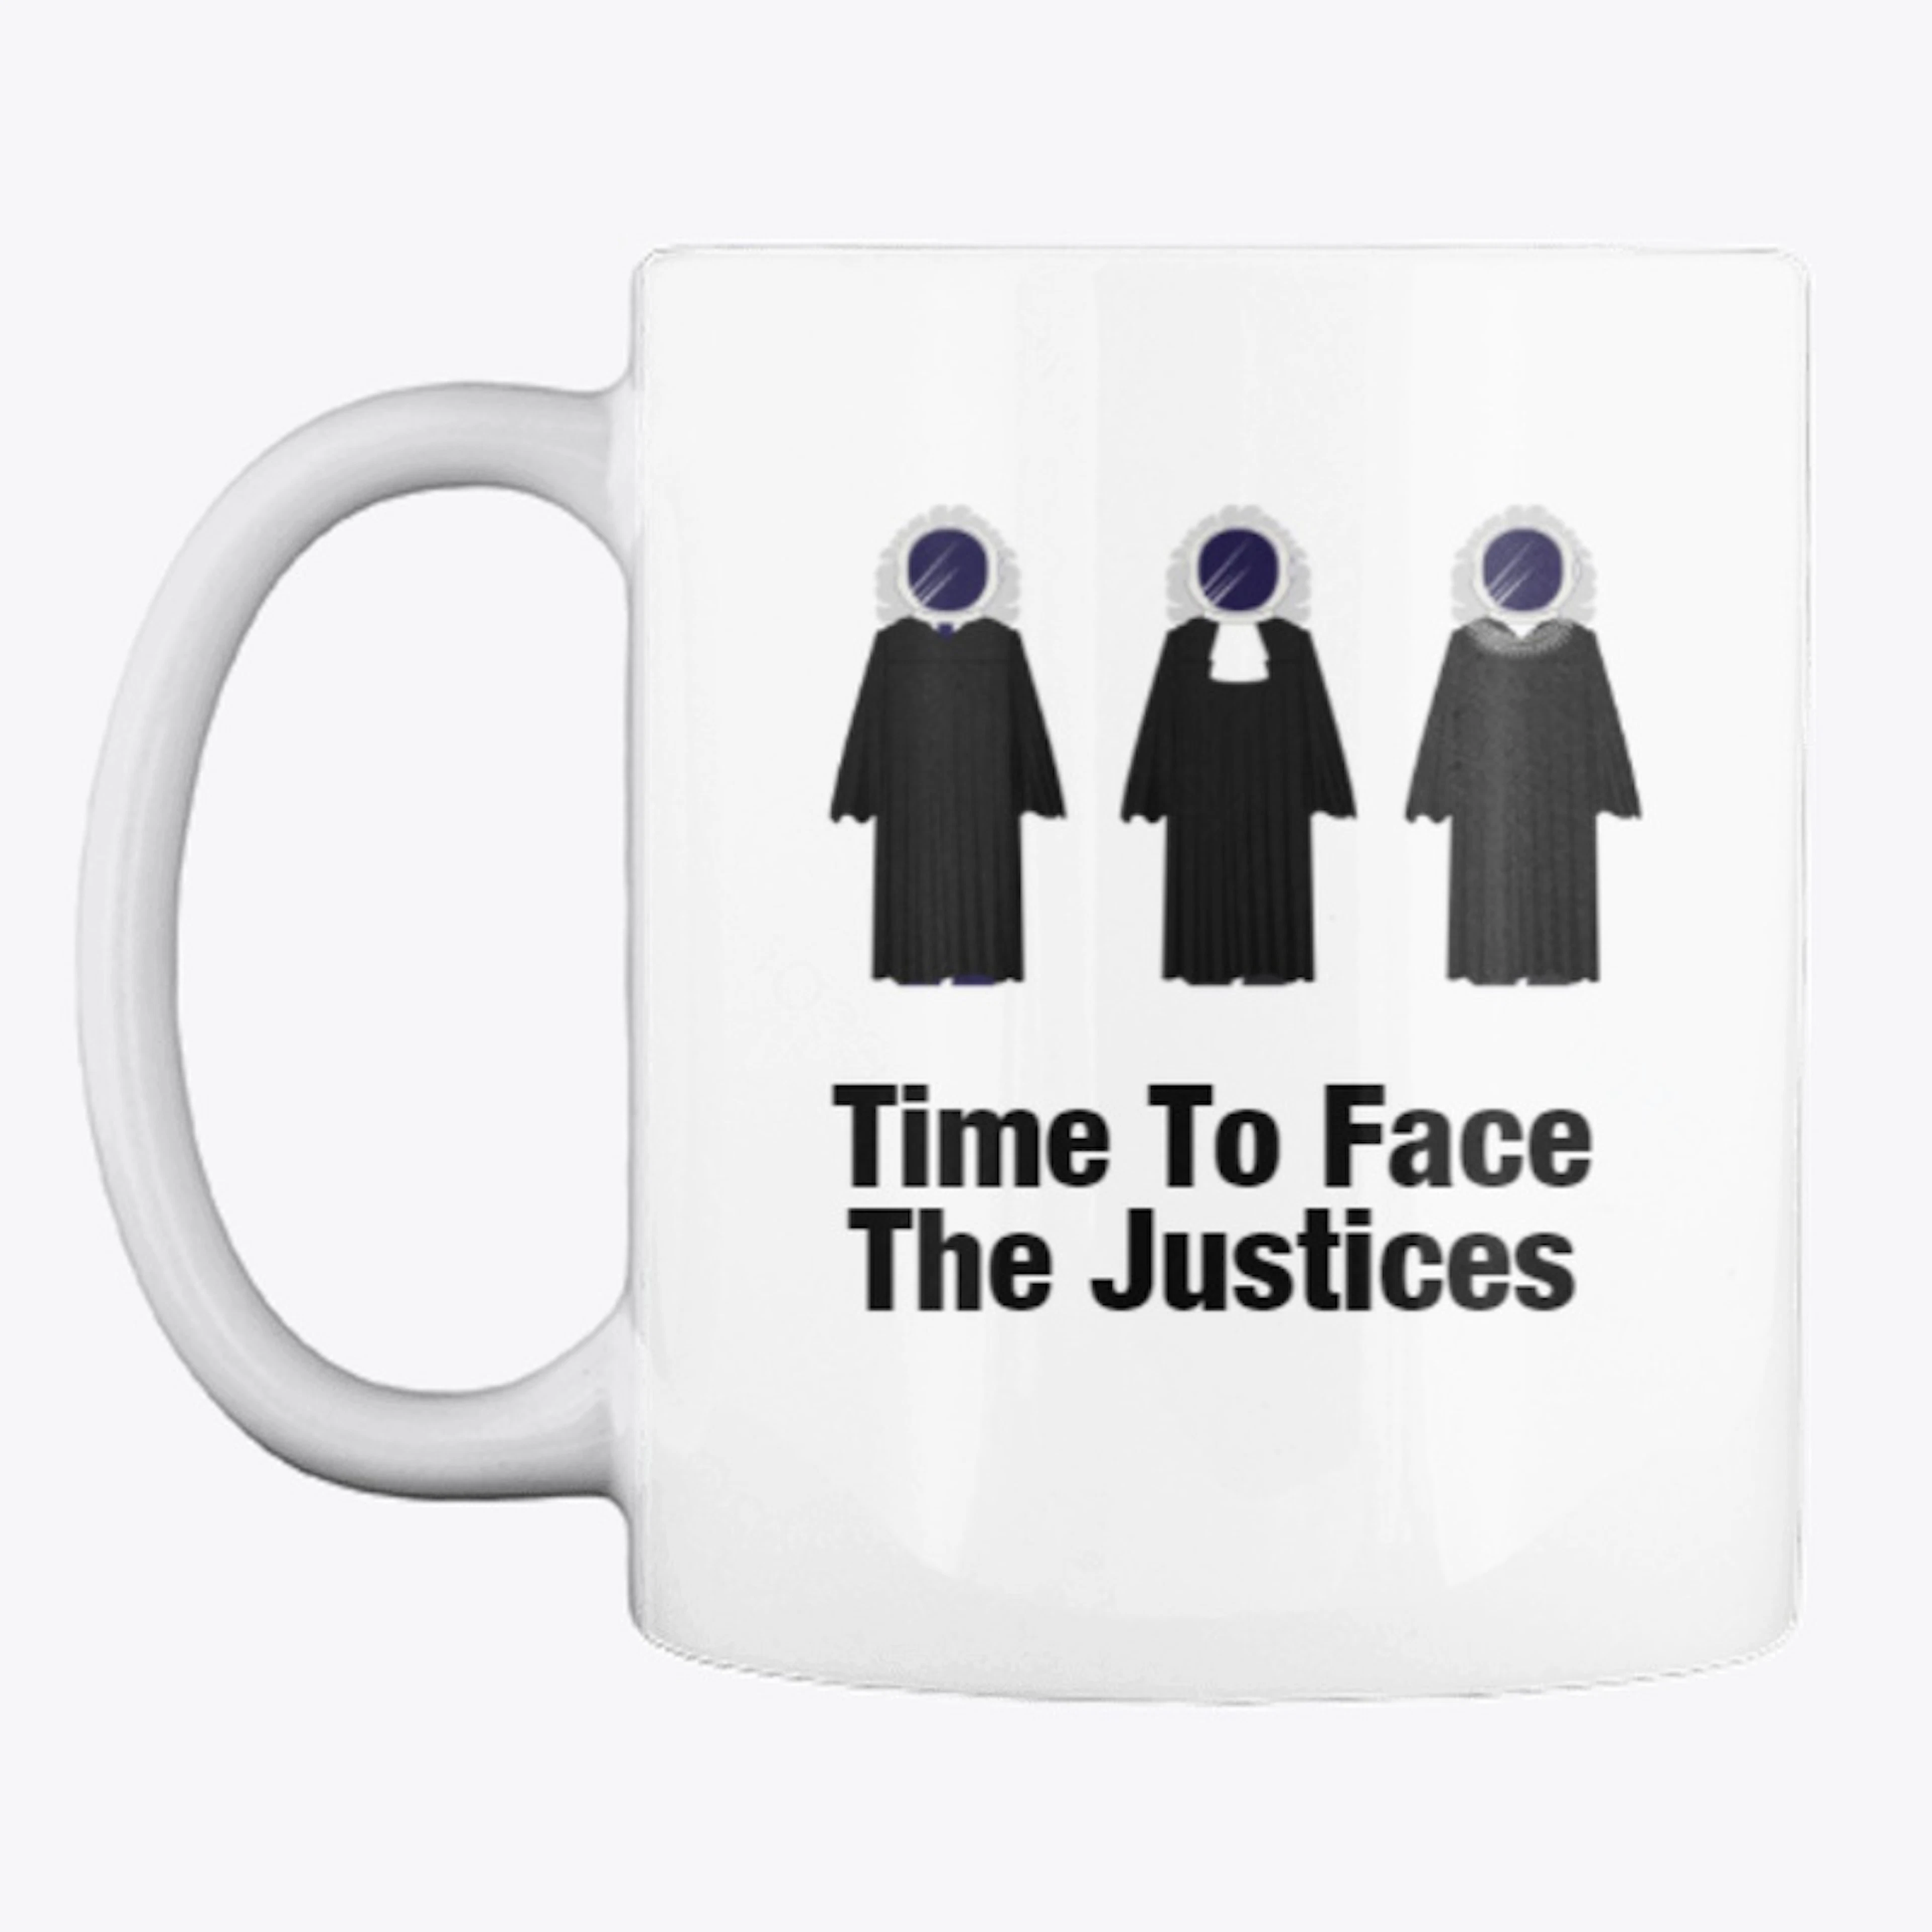 Face the Justices